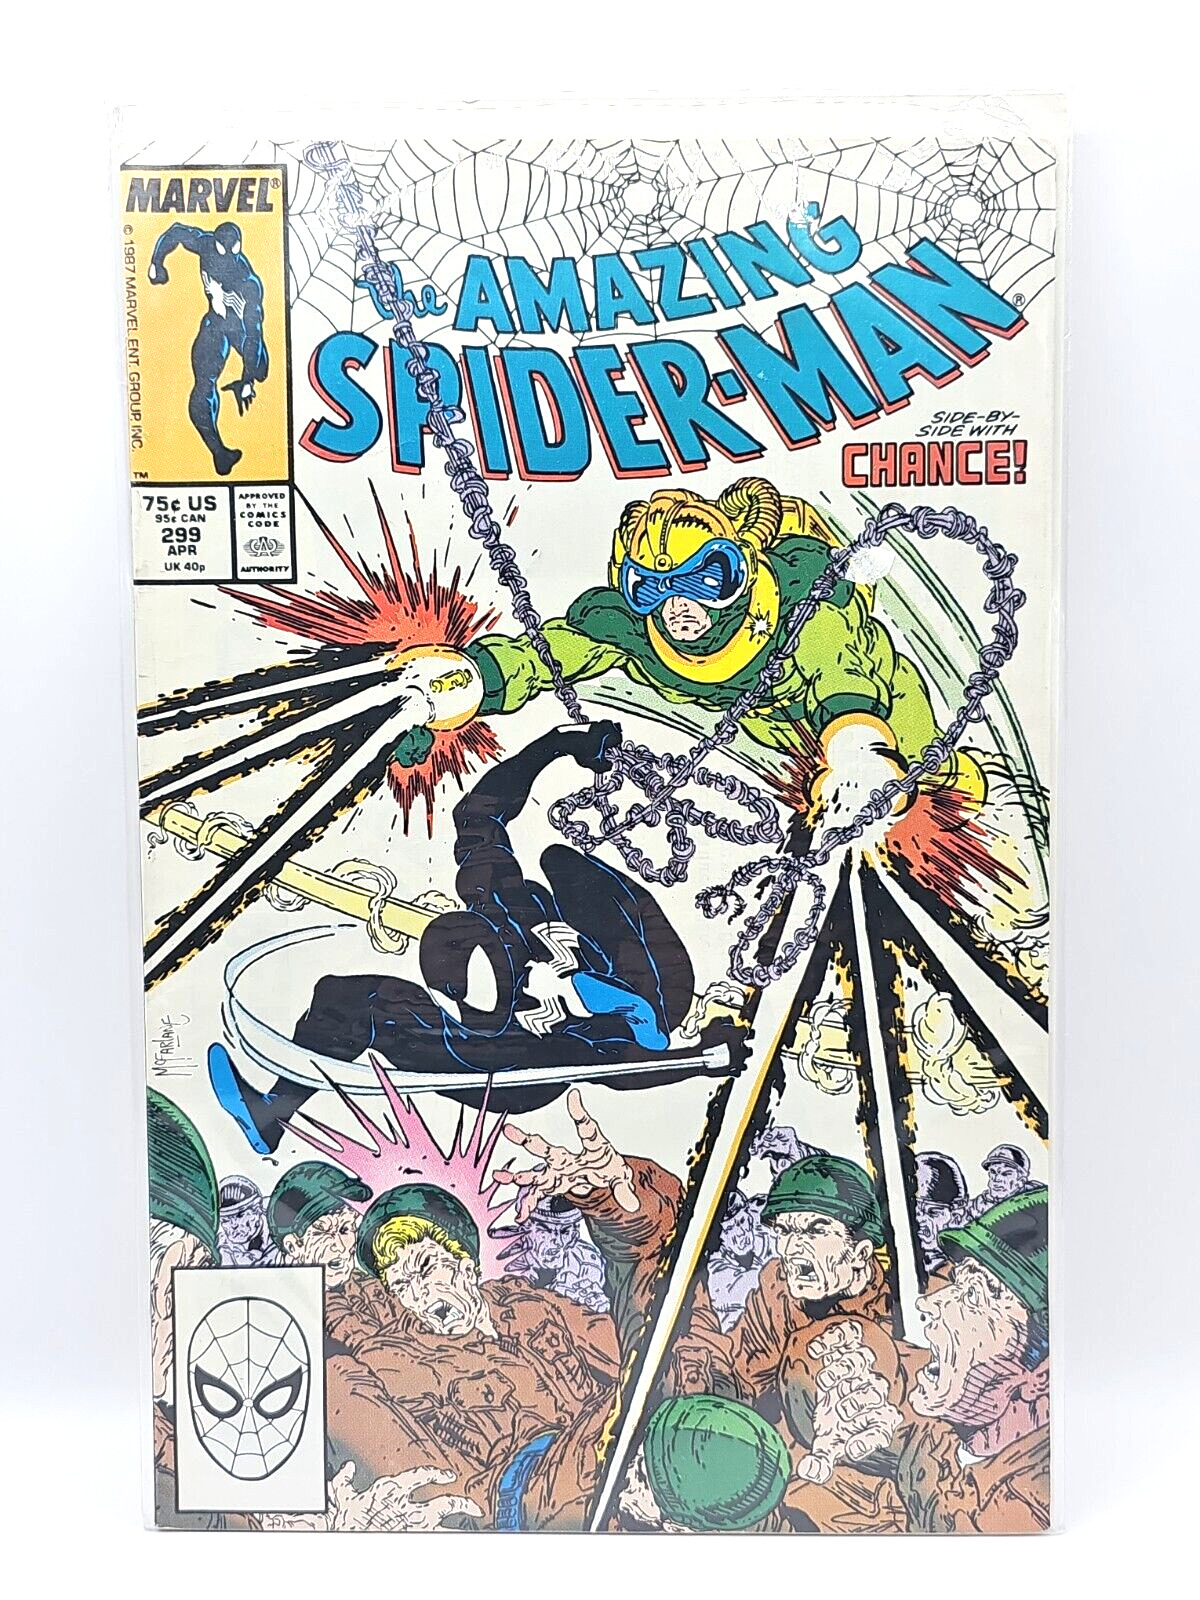 Amazing Spider-Man Marvel 299 Venom Cameo Chance Appearance 1988 Clean Comic 